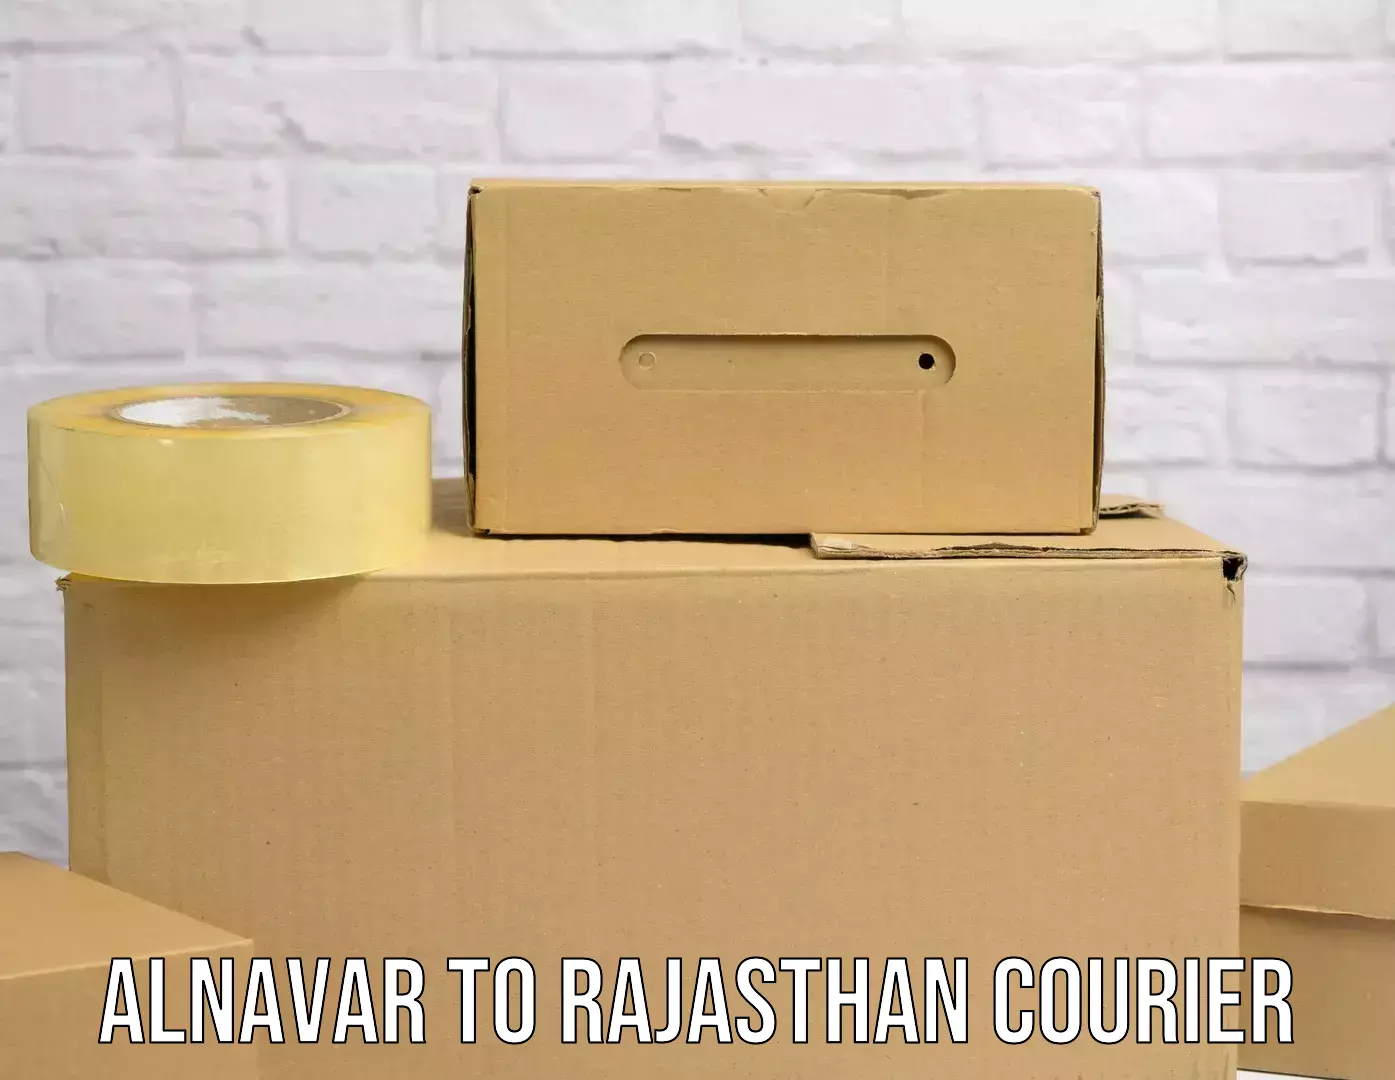 24-hour courier service Alnavar to Birla Institute of Technology and Science Pilani